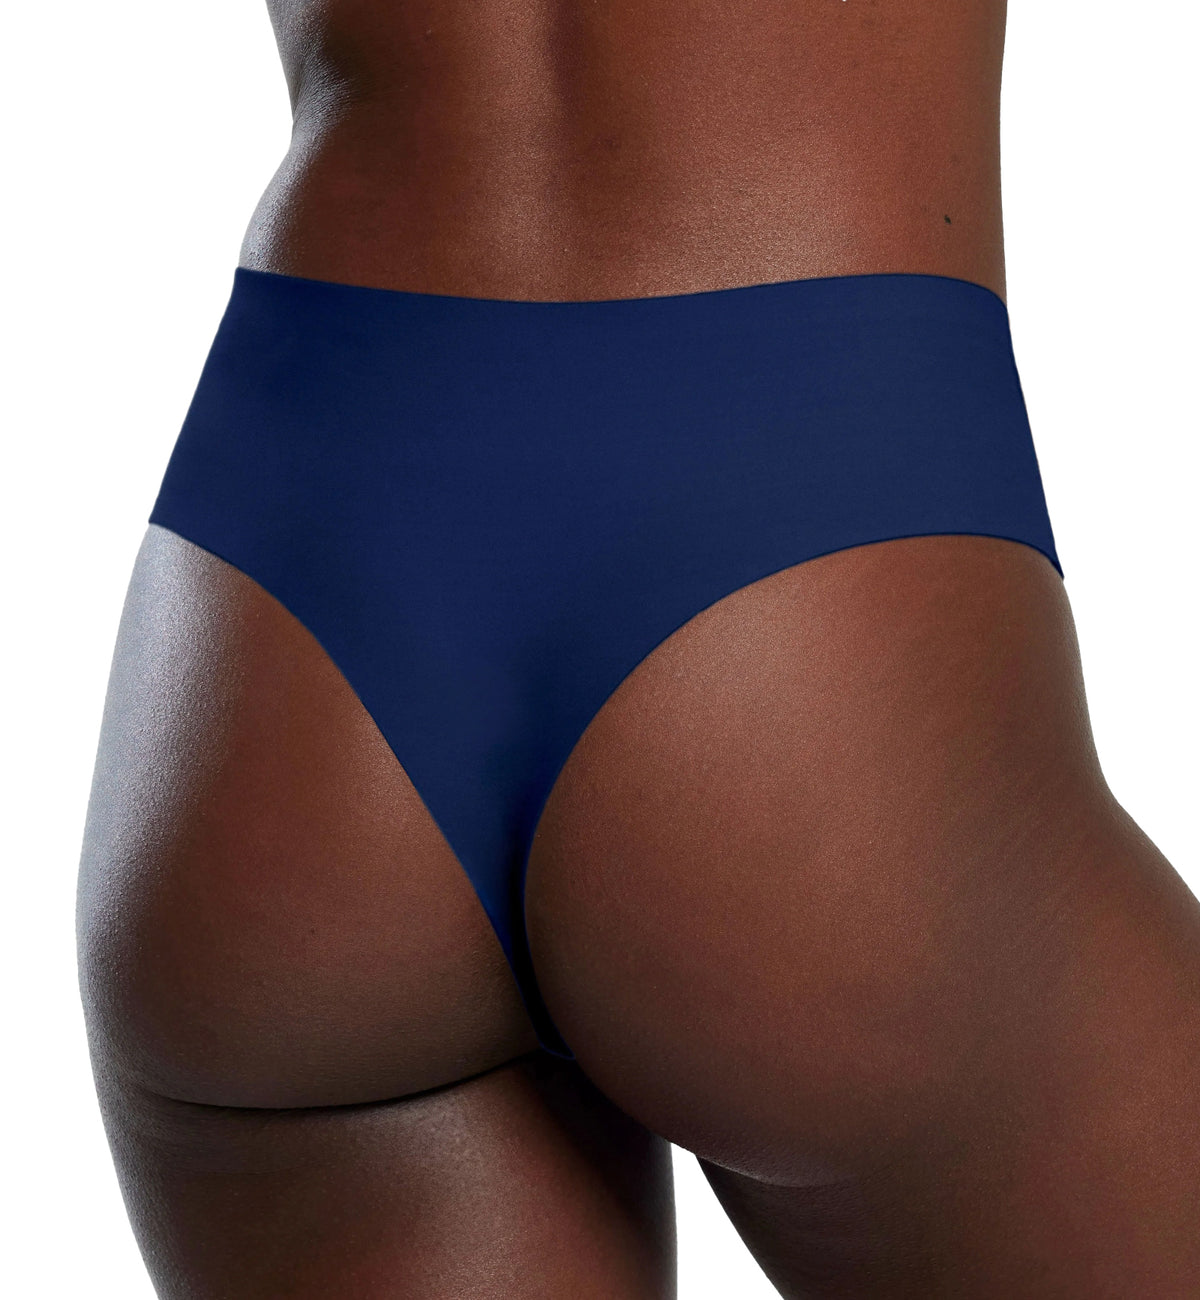 Evelyn &amp; Bobbie High-Waisted Thong (1703),US 0-14,Midnight Navy - Midnight Navy,US 0 - 14